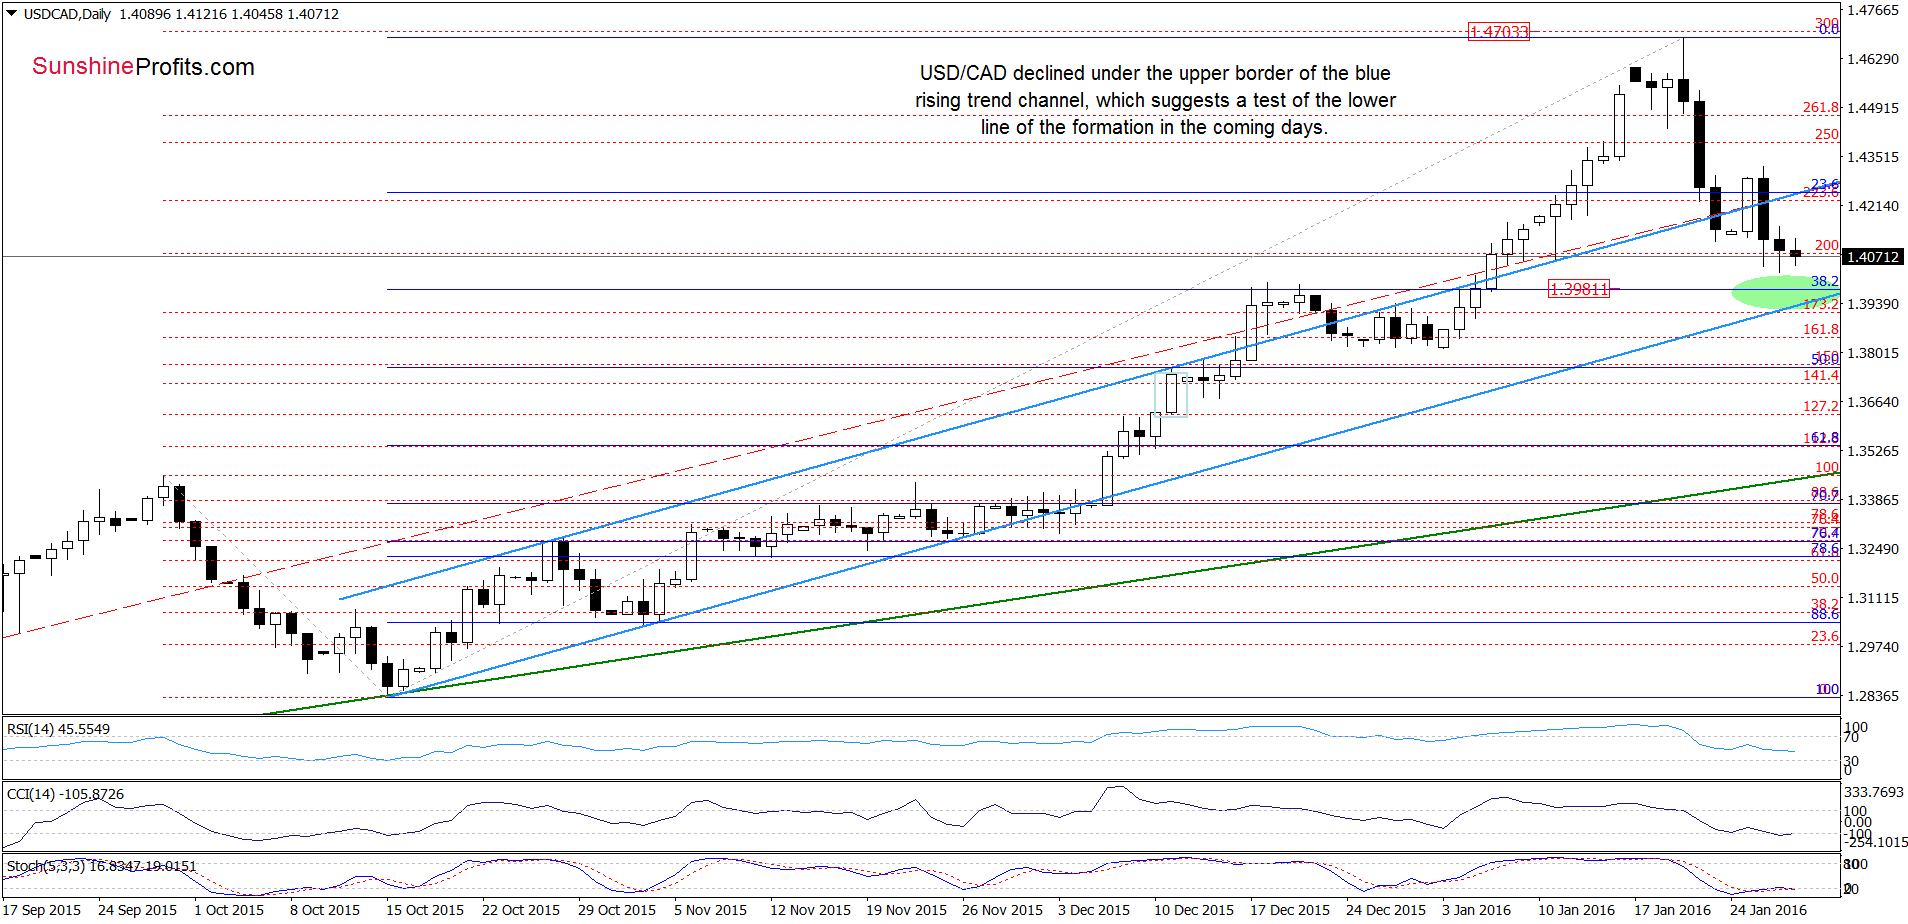 USD/CAD - the daily chart